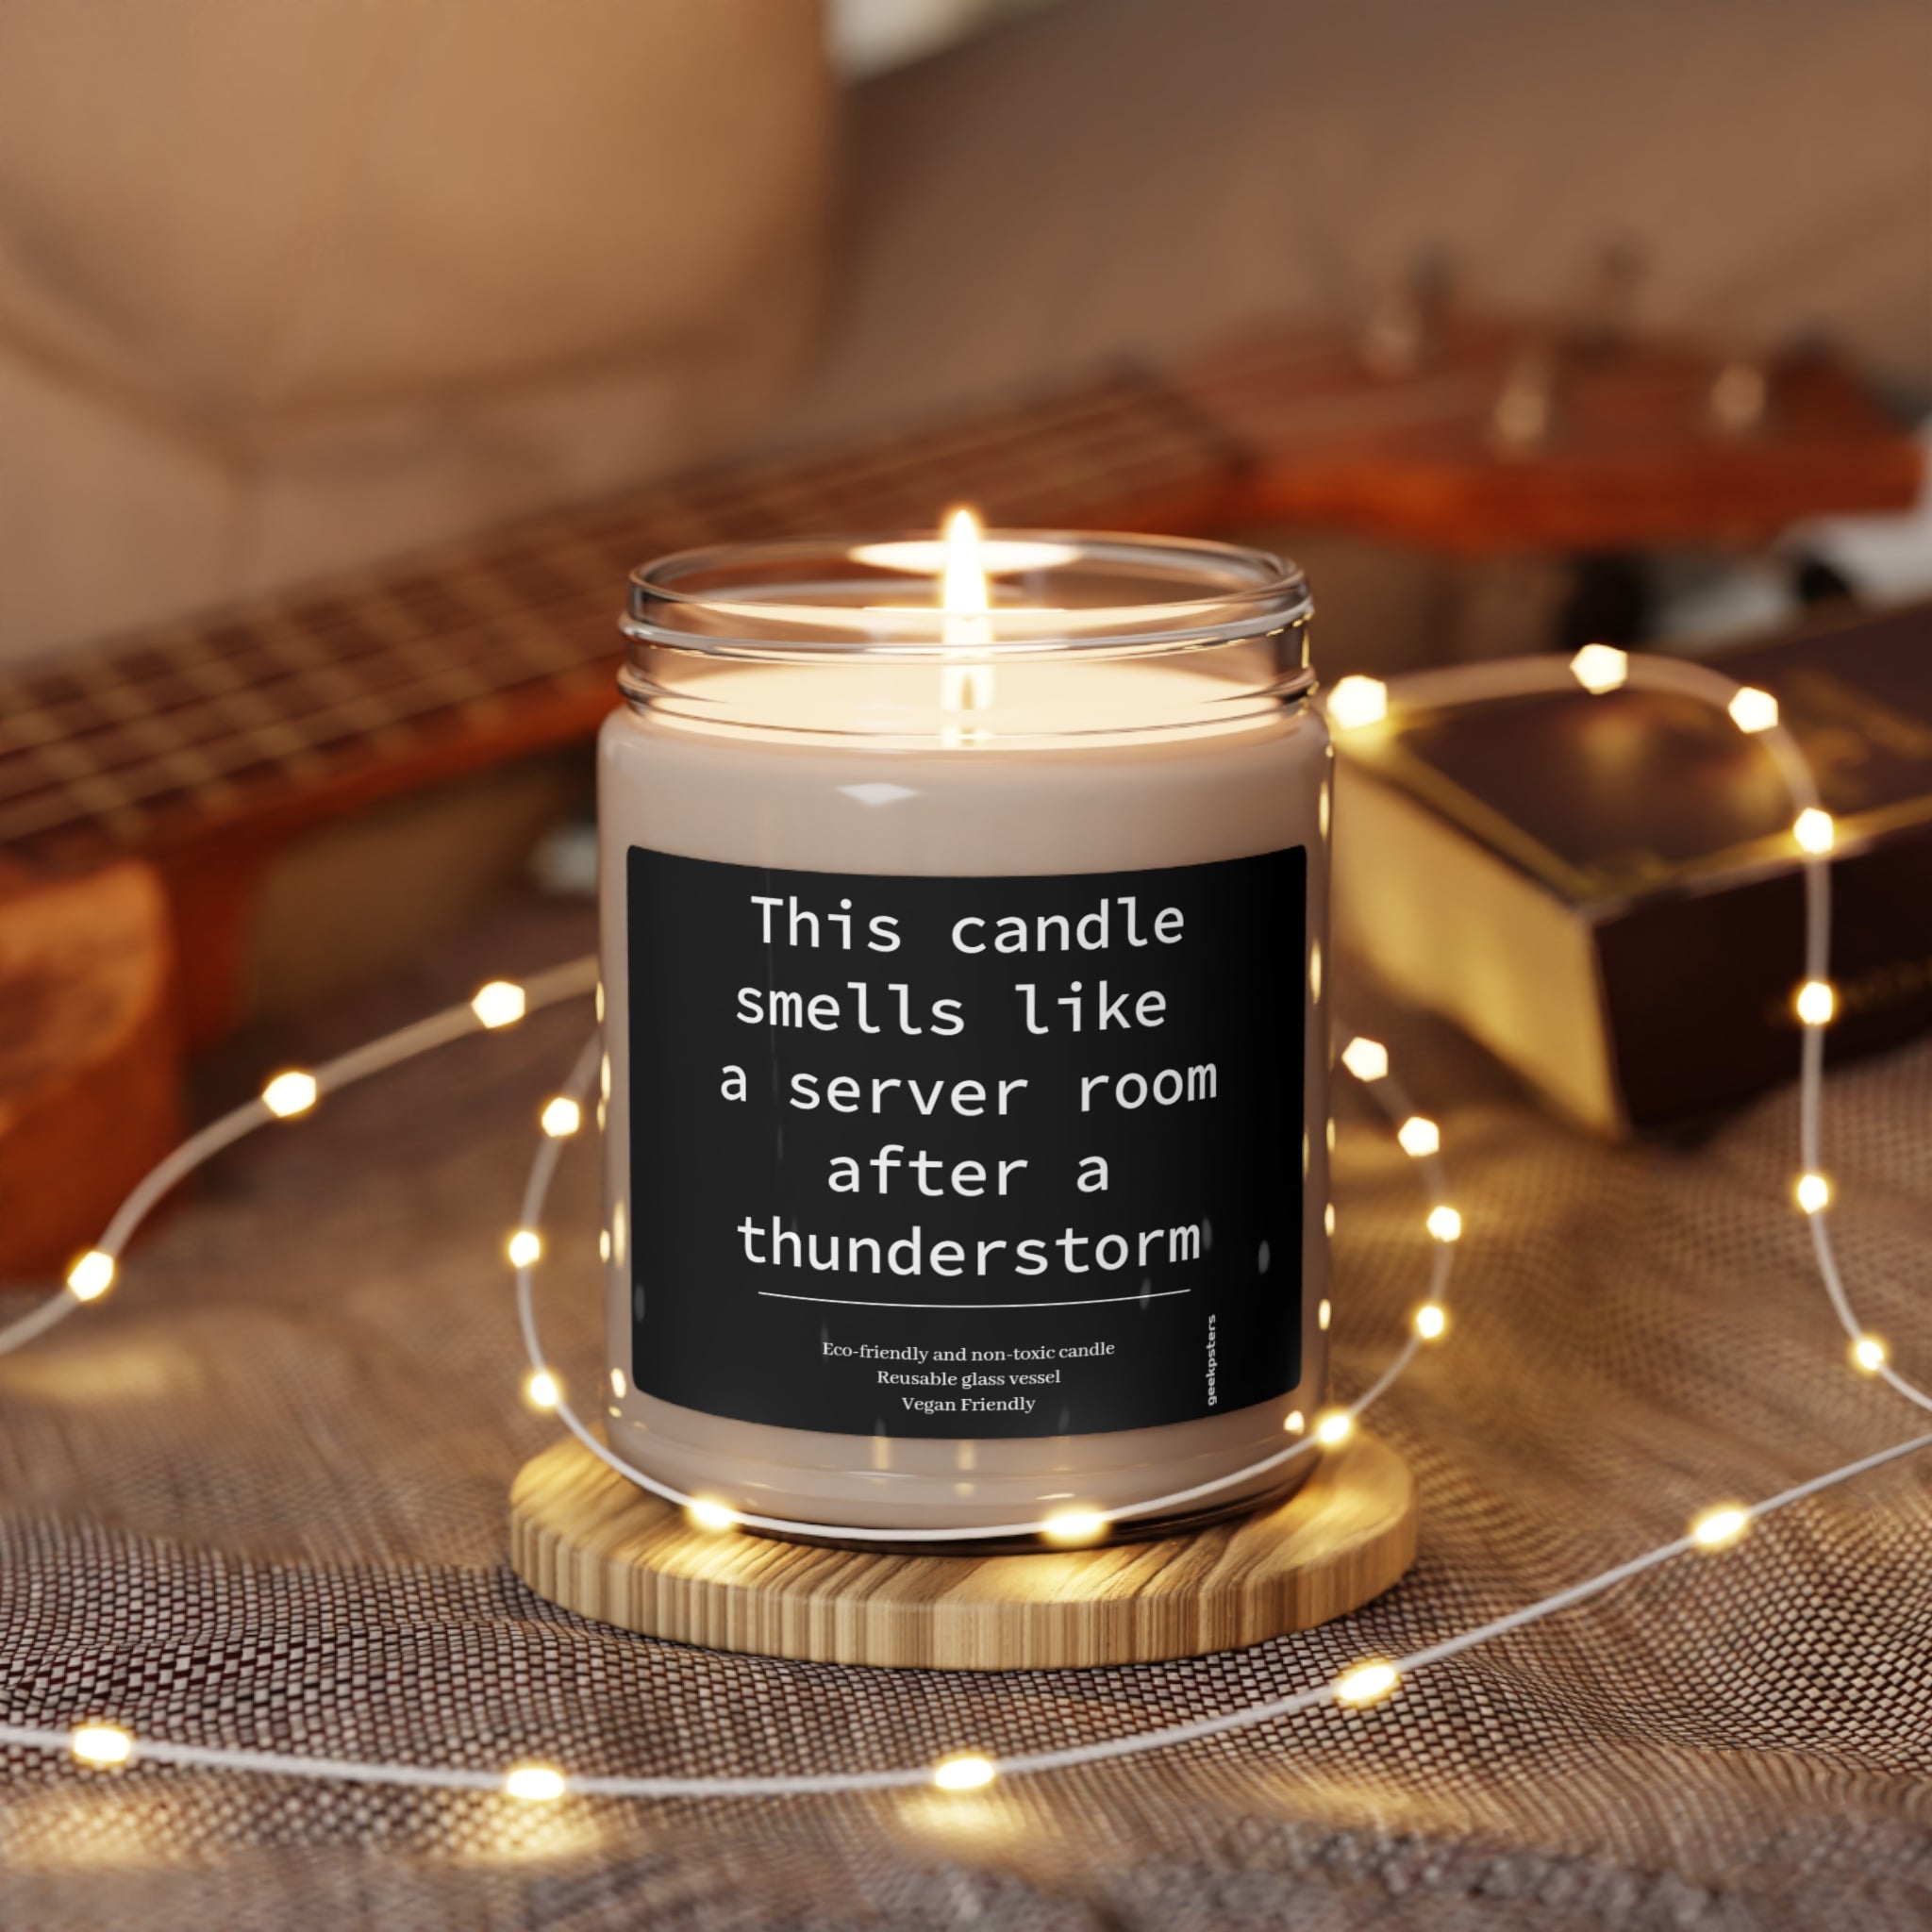 A lit scented candle with a humorous label, made from This Candle Smells Like a Server Room After a Thunderstorm soy wax blend and featuring a cotton wick, set against a cozy backdrop with soft lighting and festive decorations.